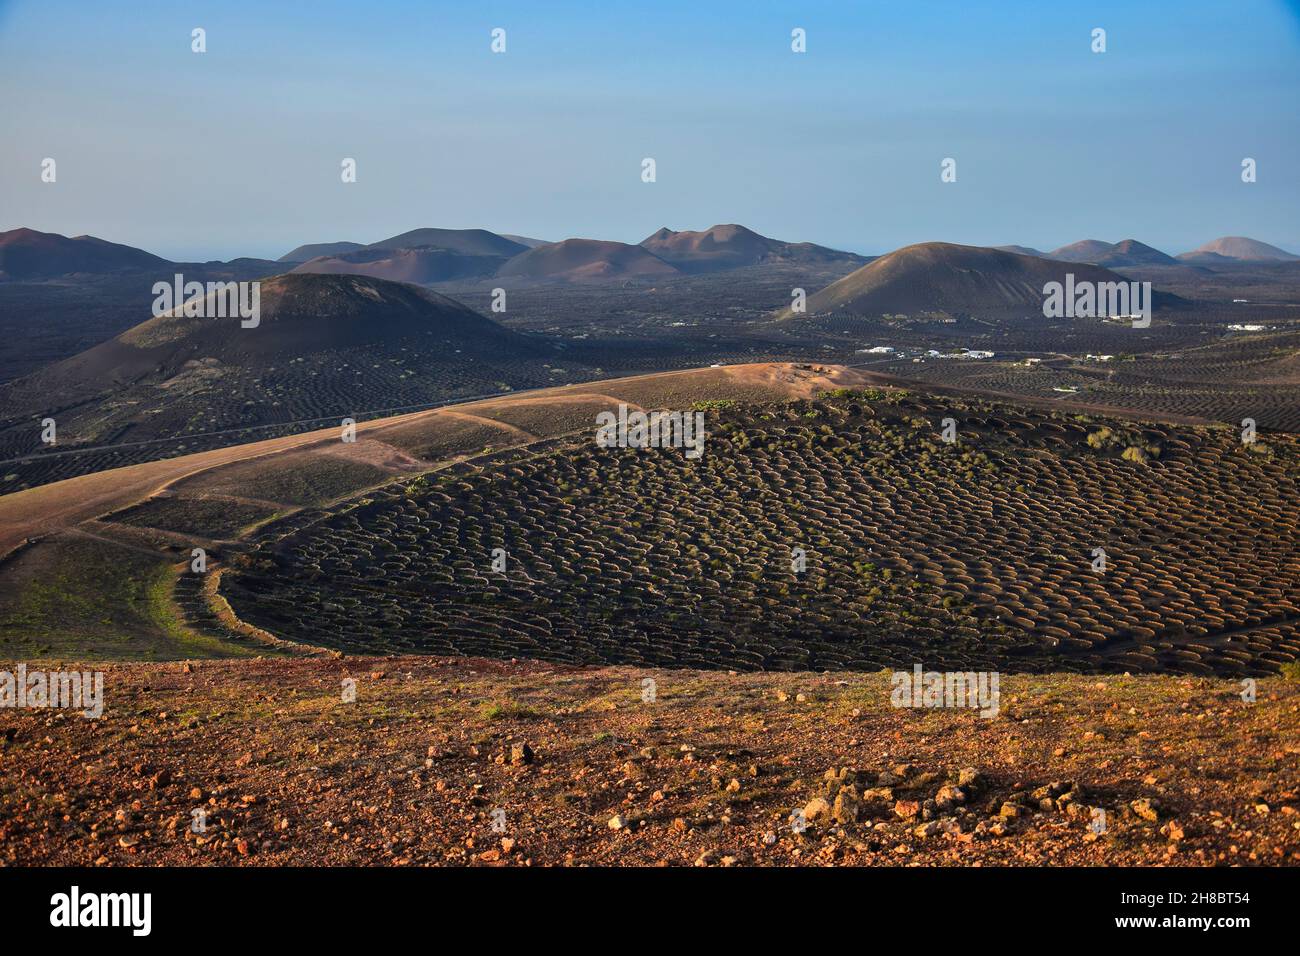 The wine-growing area of La Geria, Lanzarote. In the background the volcanos of the Timanfaya National Park. Canary Islands, Spain. Stock Photo